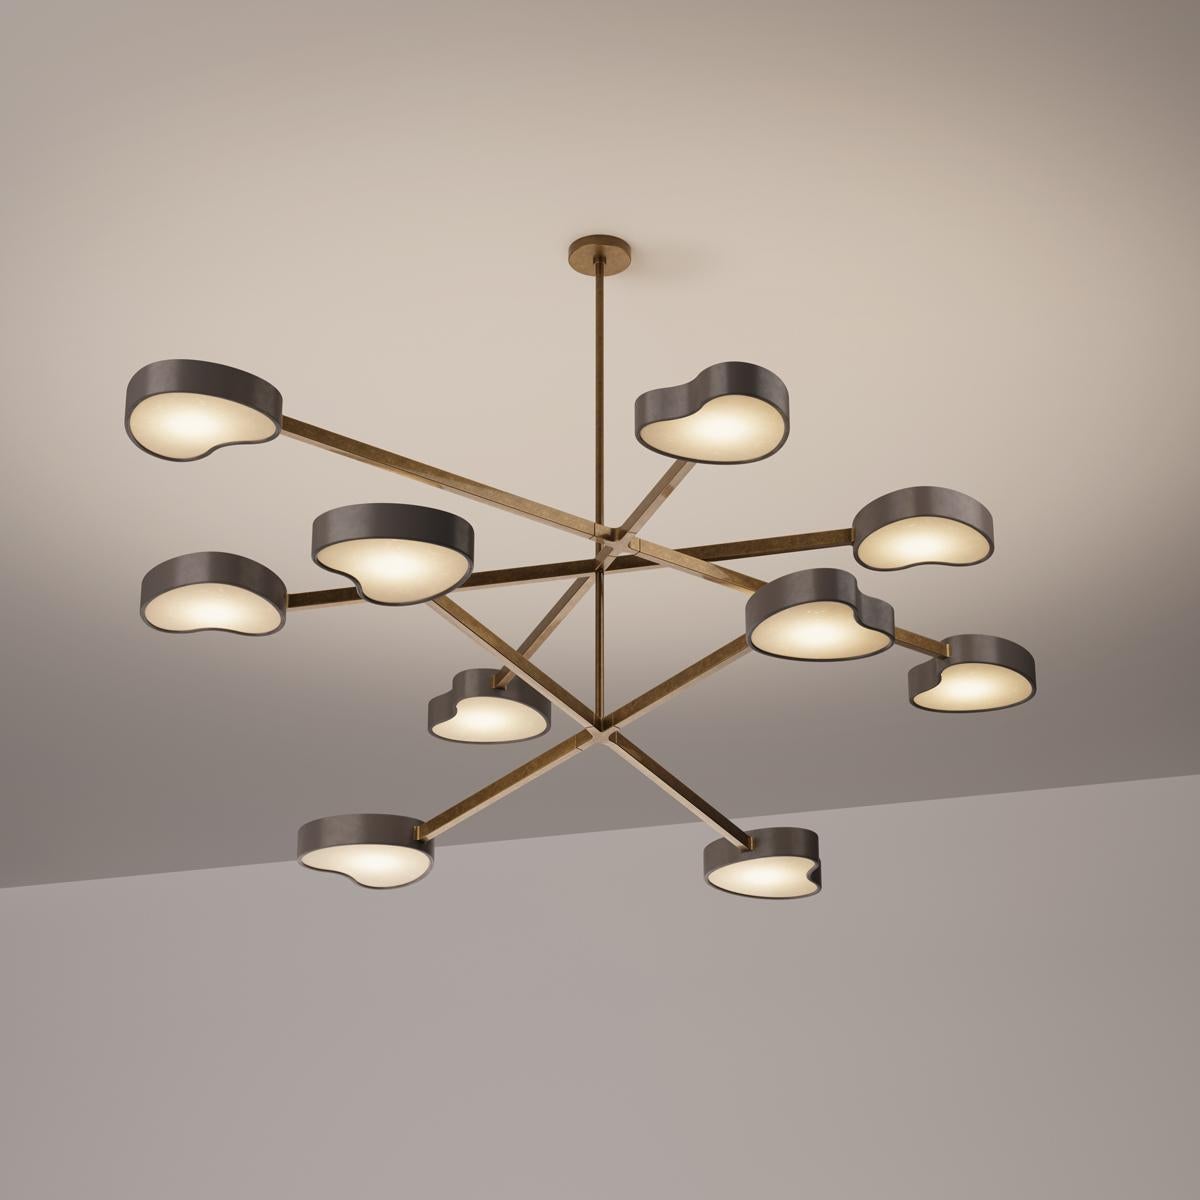 Cuore N.10 Ceiling Light by Gaspare Asaro. Peltro and Bronze Finish In New Condition For Sale In New York, NY